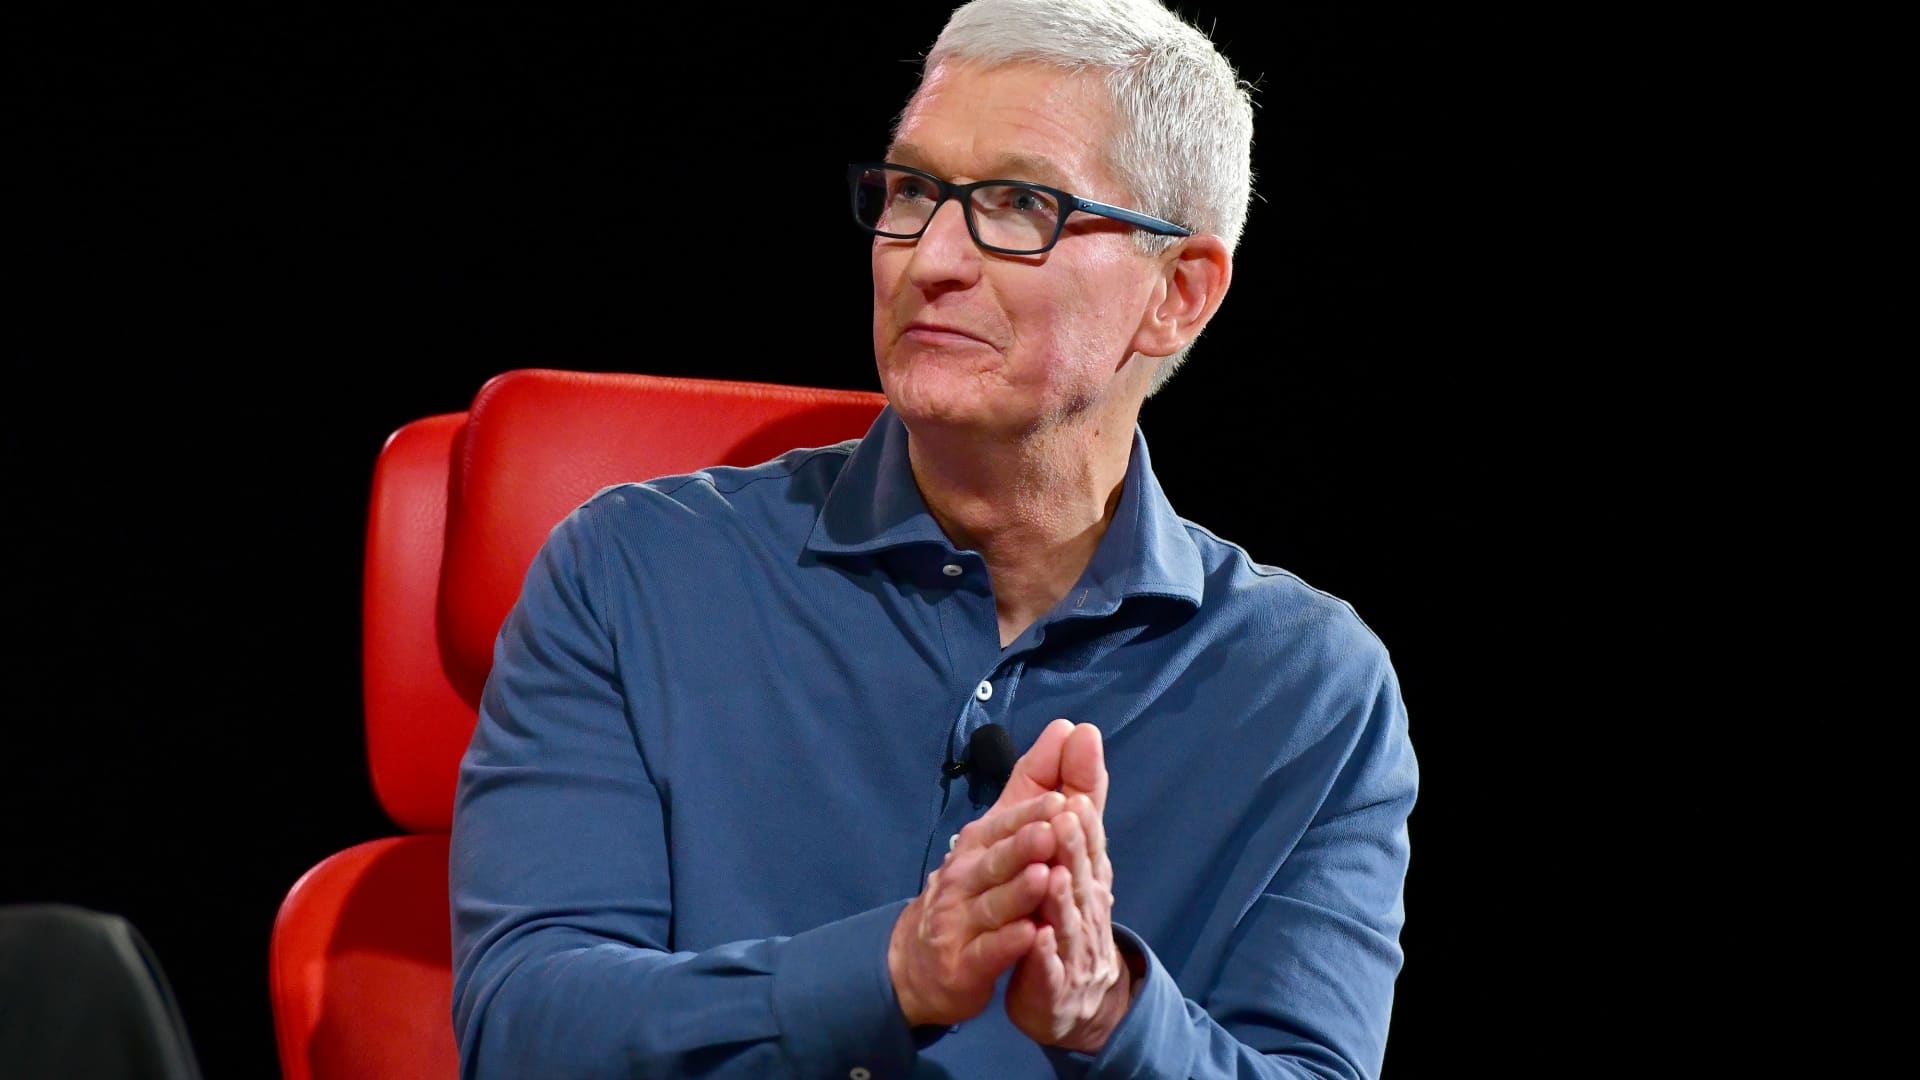 Apple telegraphed that things are getting better after a tough quarter